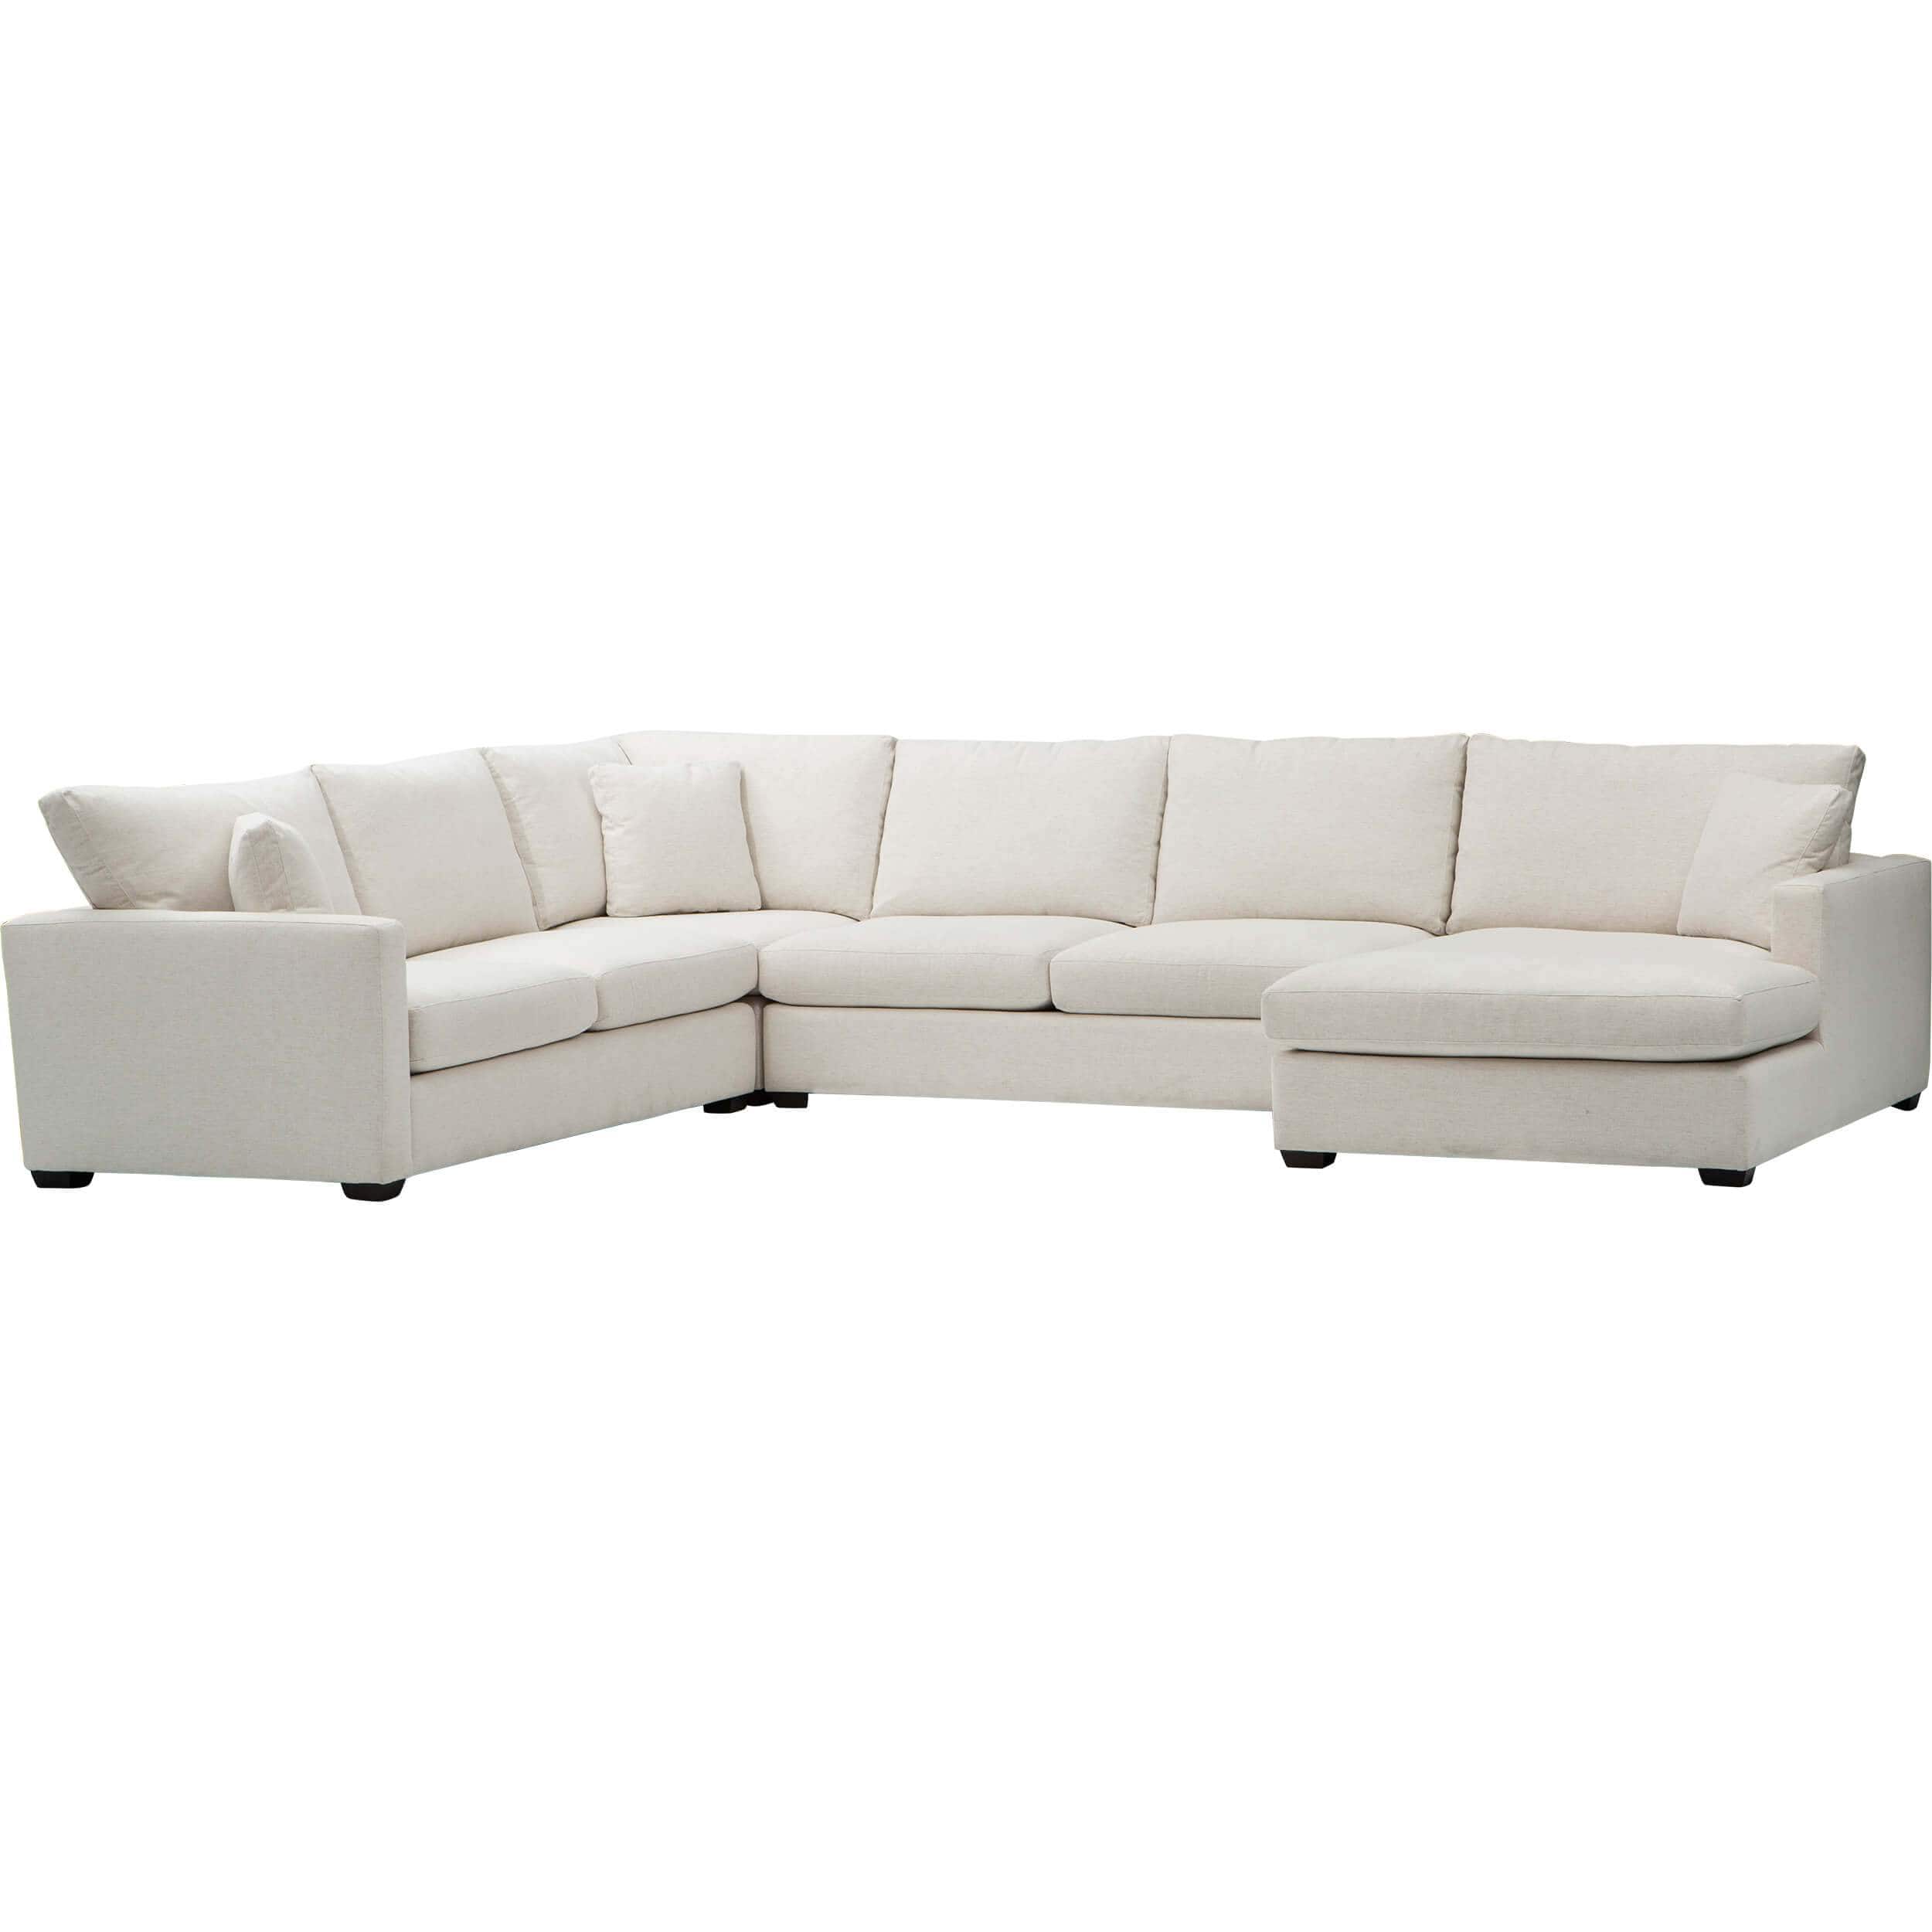 Image of Gage Sectional, Nomad Snow